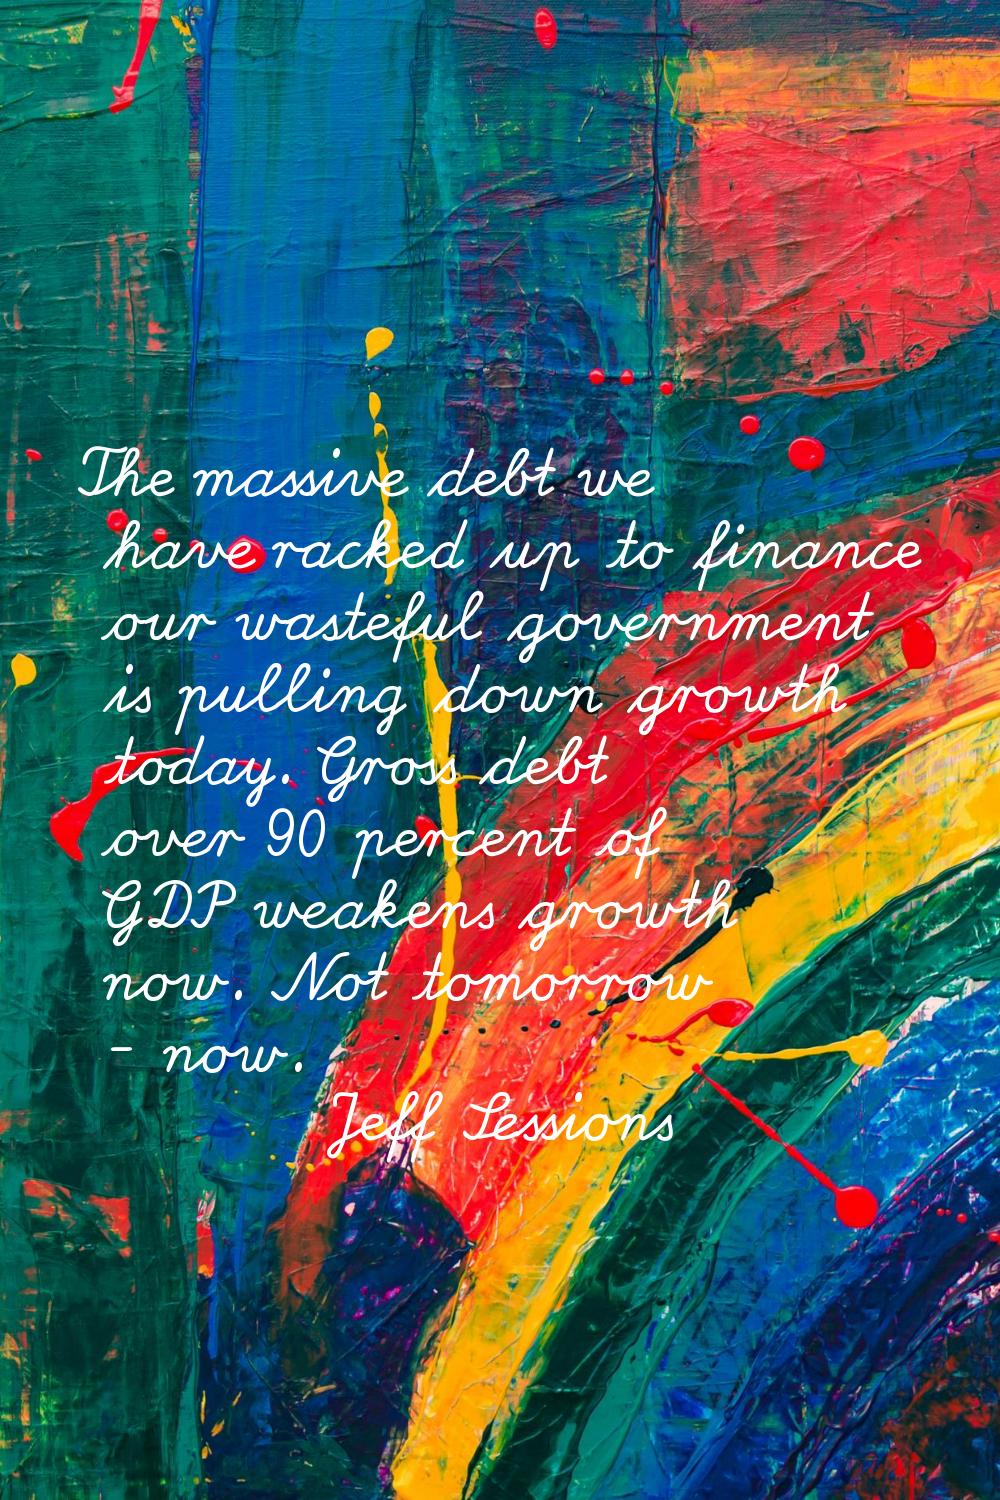 The massive debt we have racked up to finance our wasteful government is pulling down growth today.